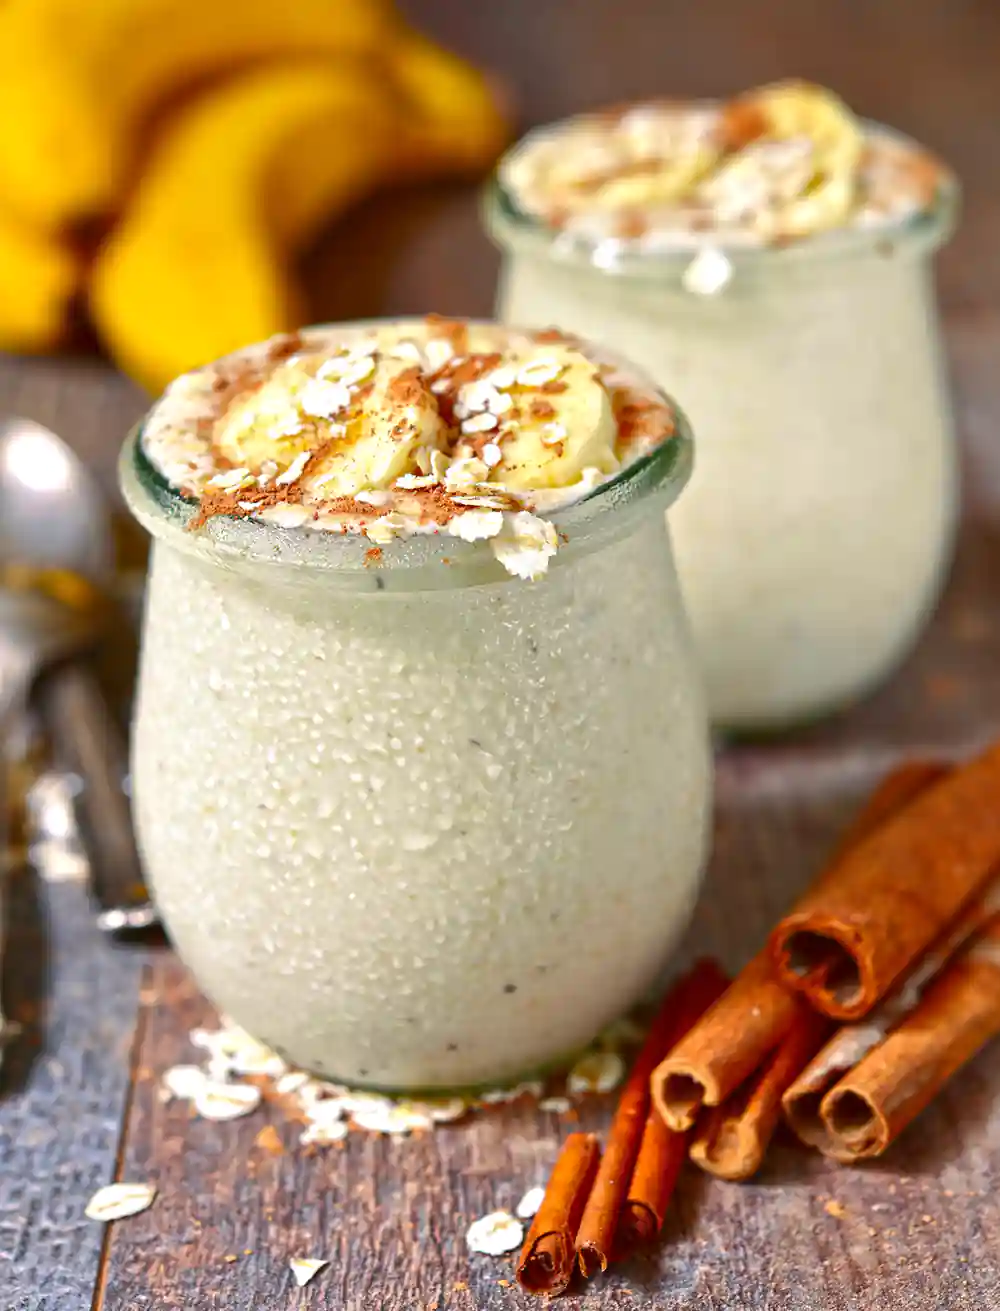 Banana smoothie with oats